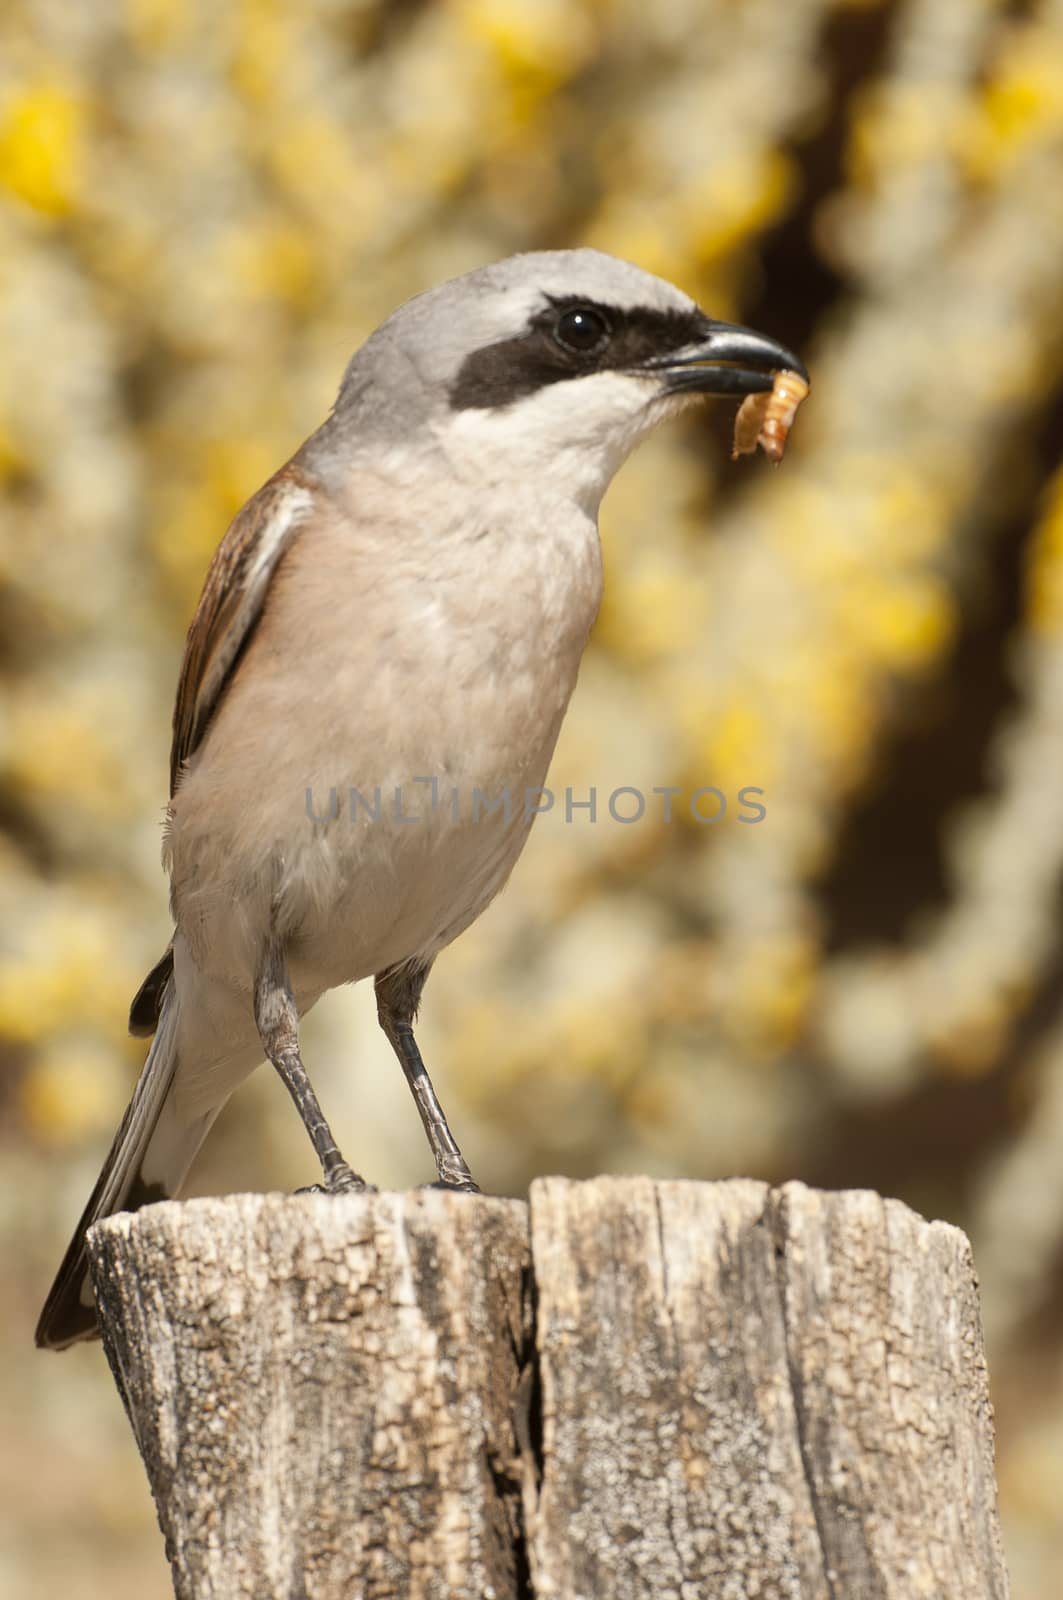 Shrike with red back. Lanius collurio, with a yellow background on a trunk and a worm in its beak